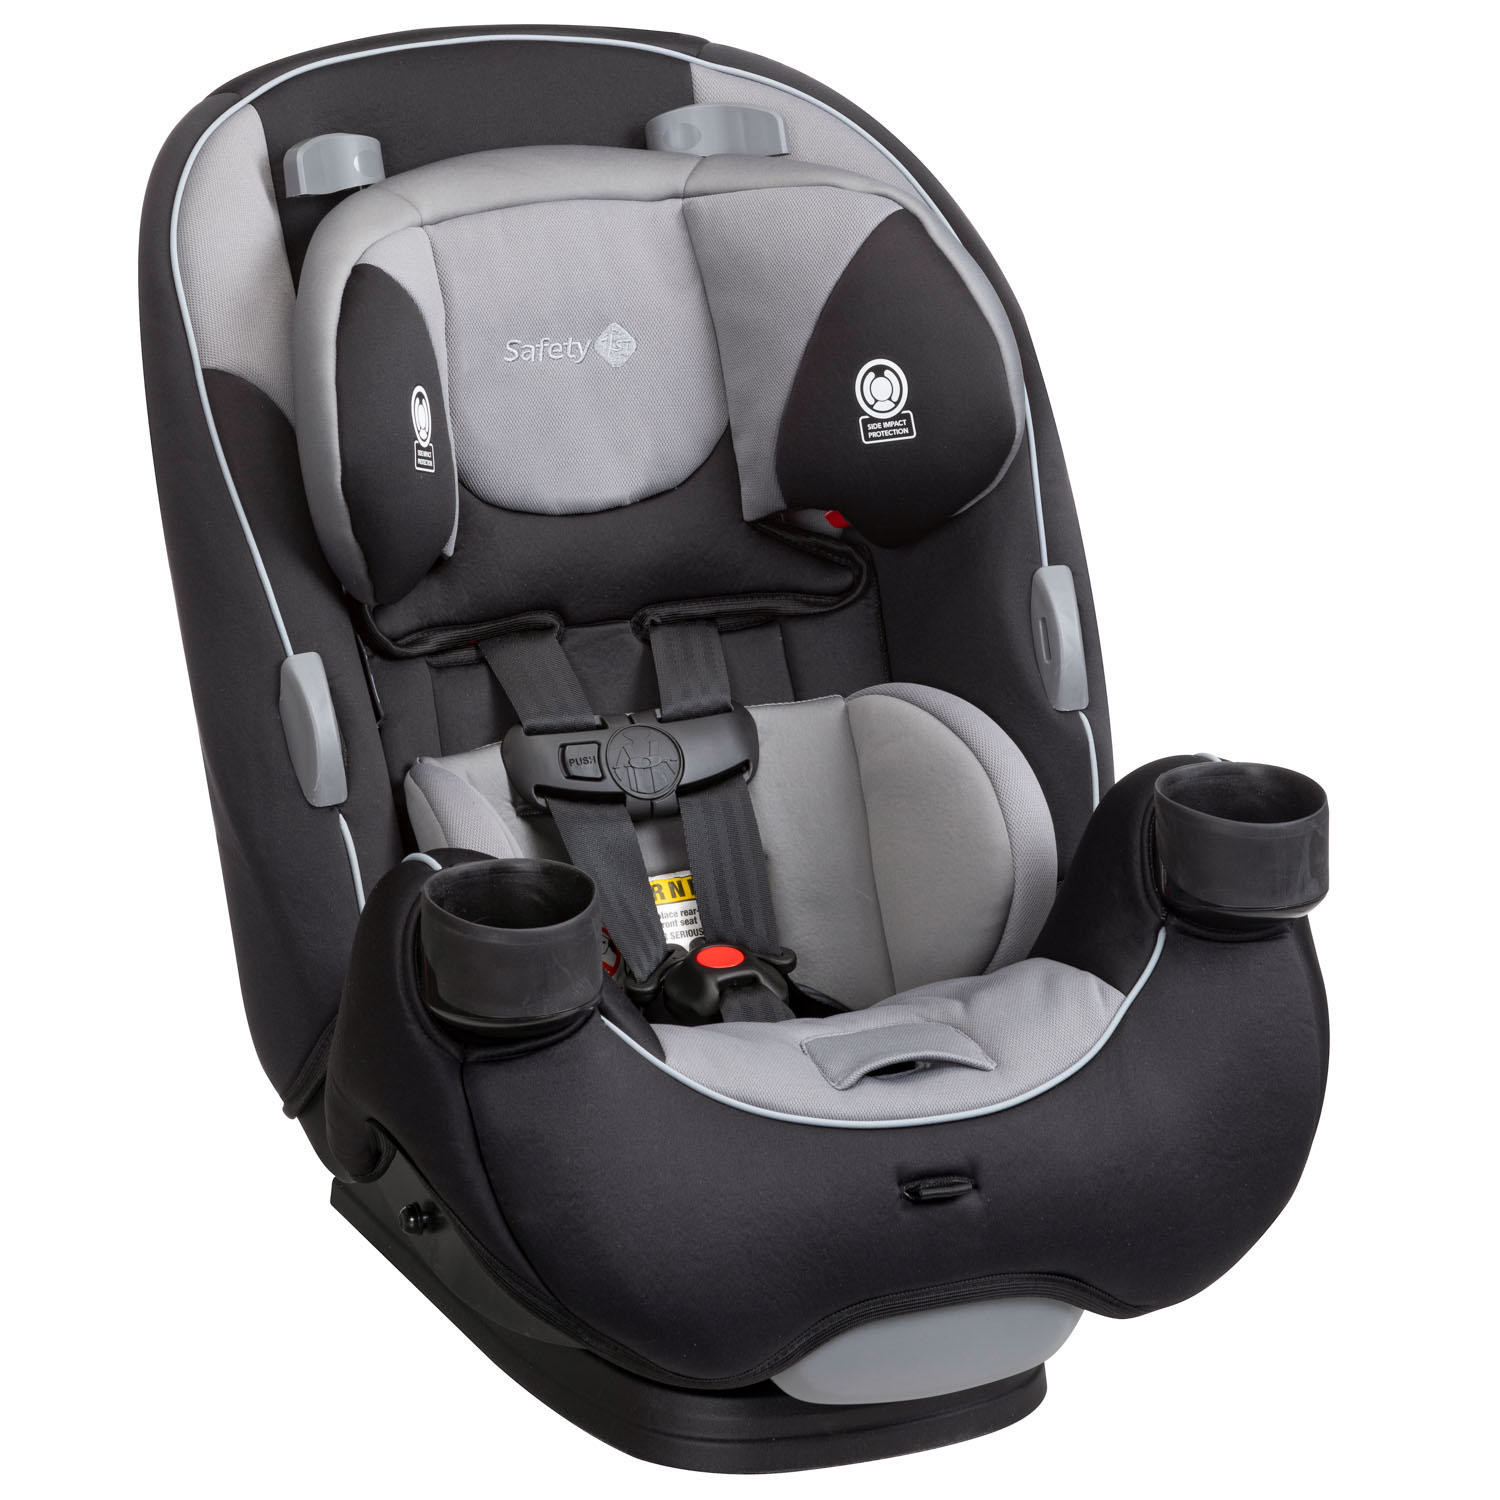 the car seat